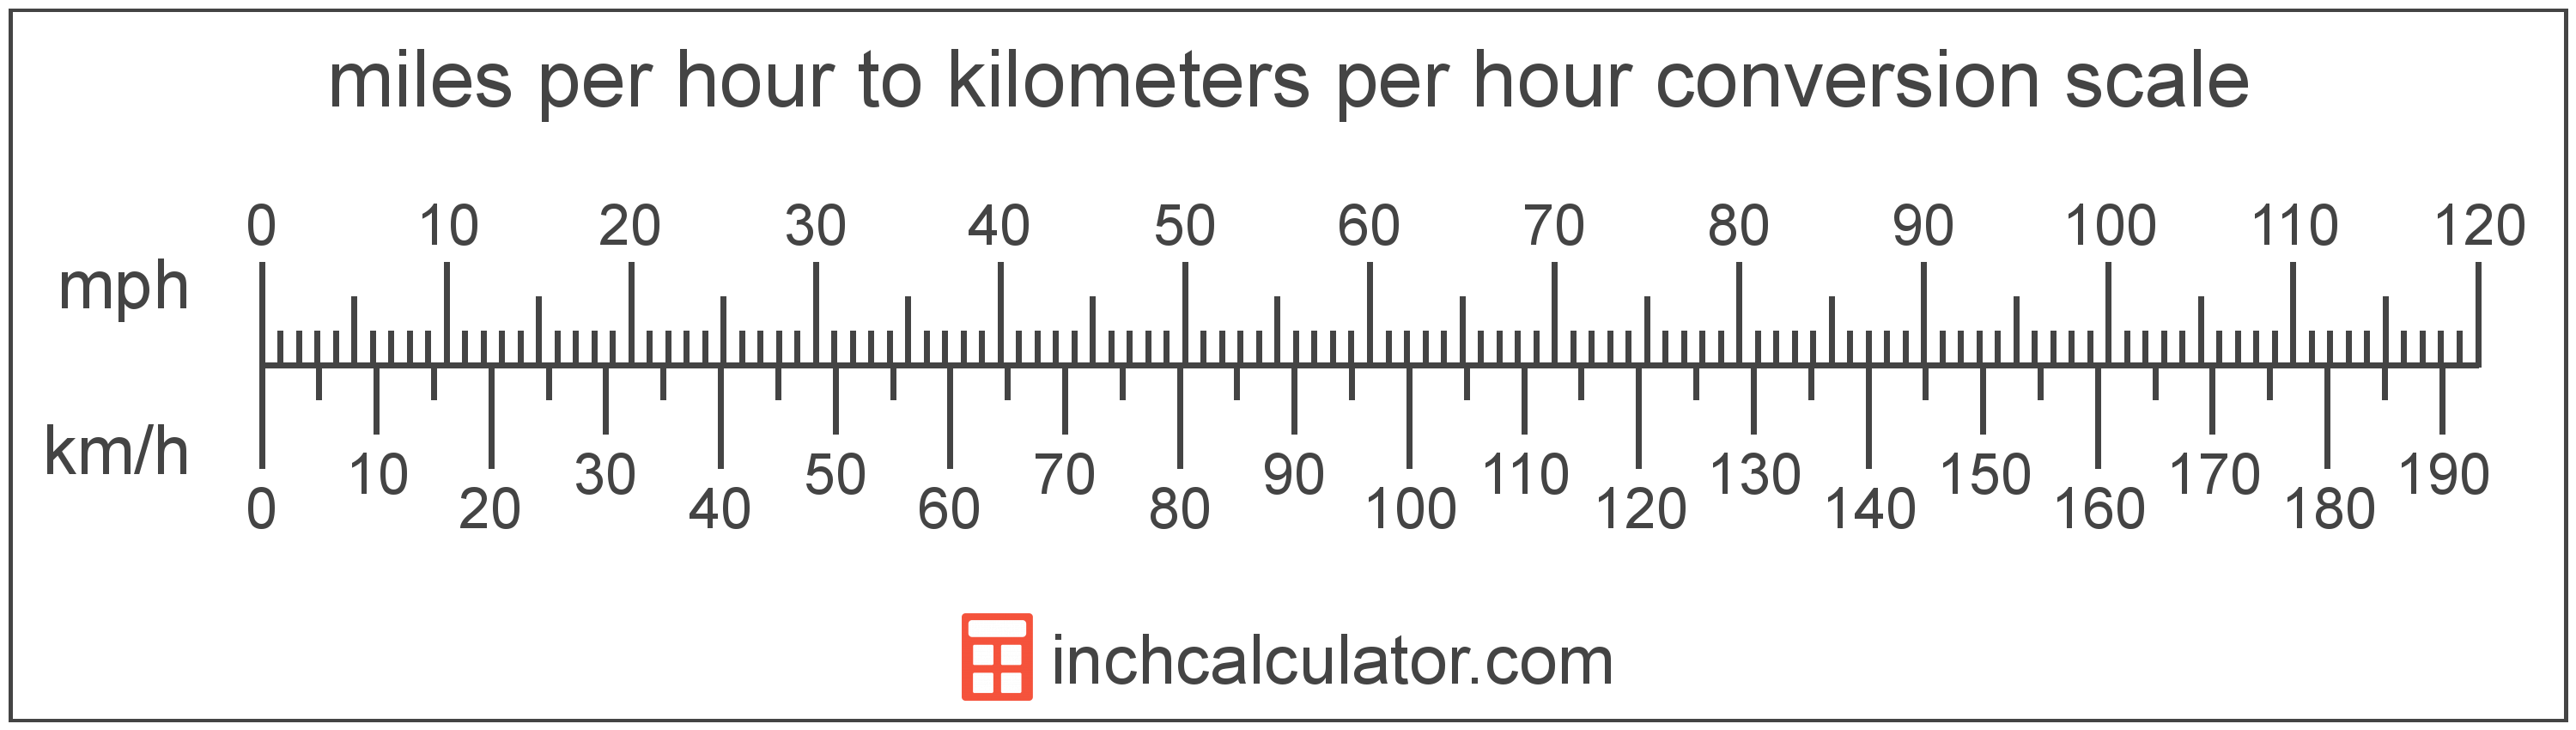 miles an hour to km per hour